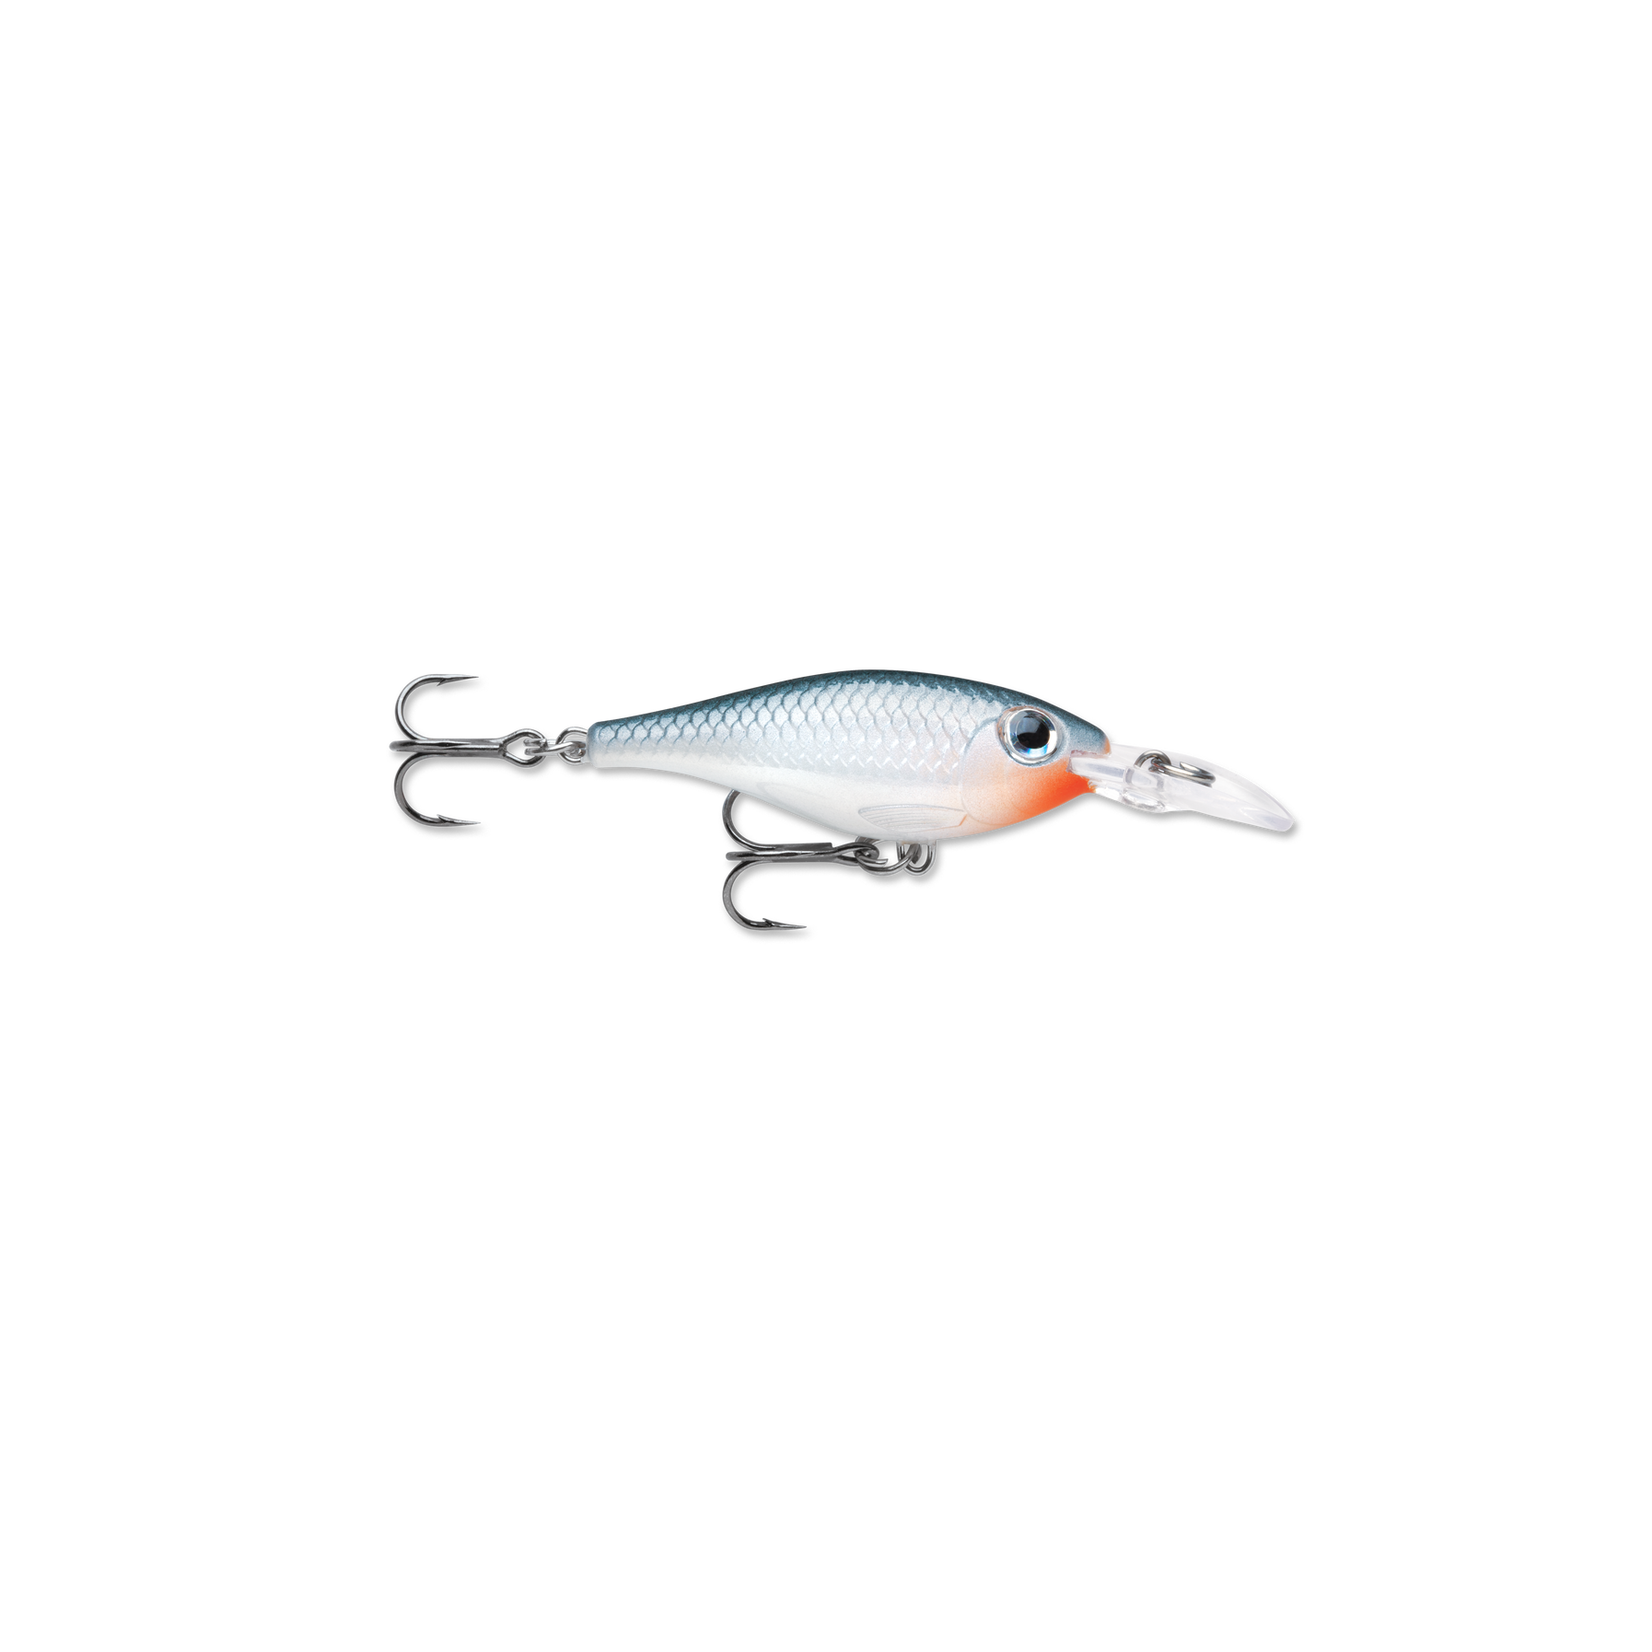 Ultra Light Shad - Silver Blue 1 1/2 - Butte's Outdoor Edge